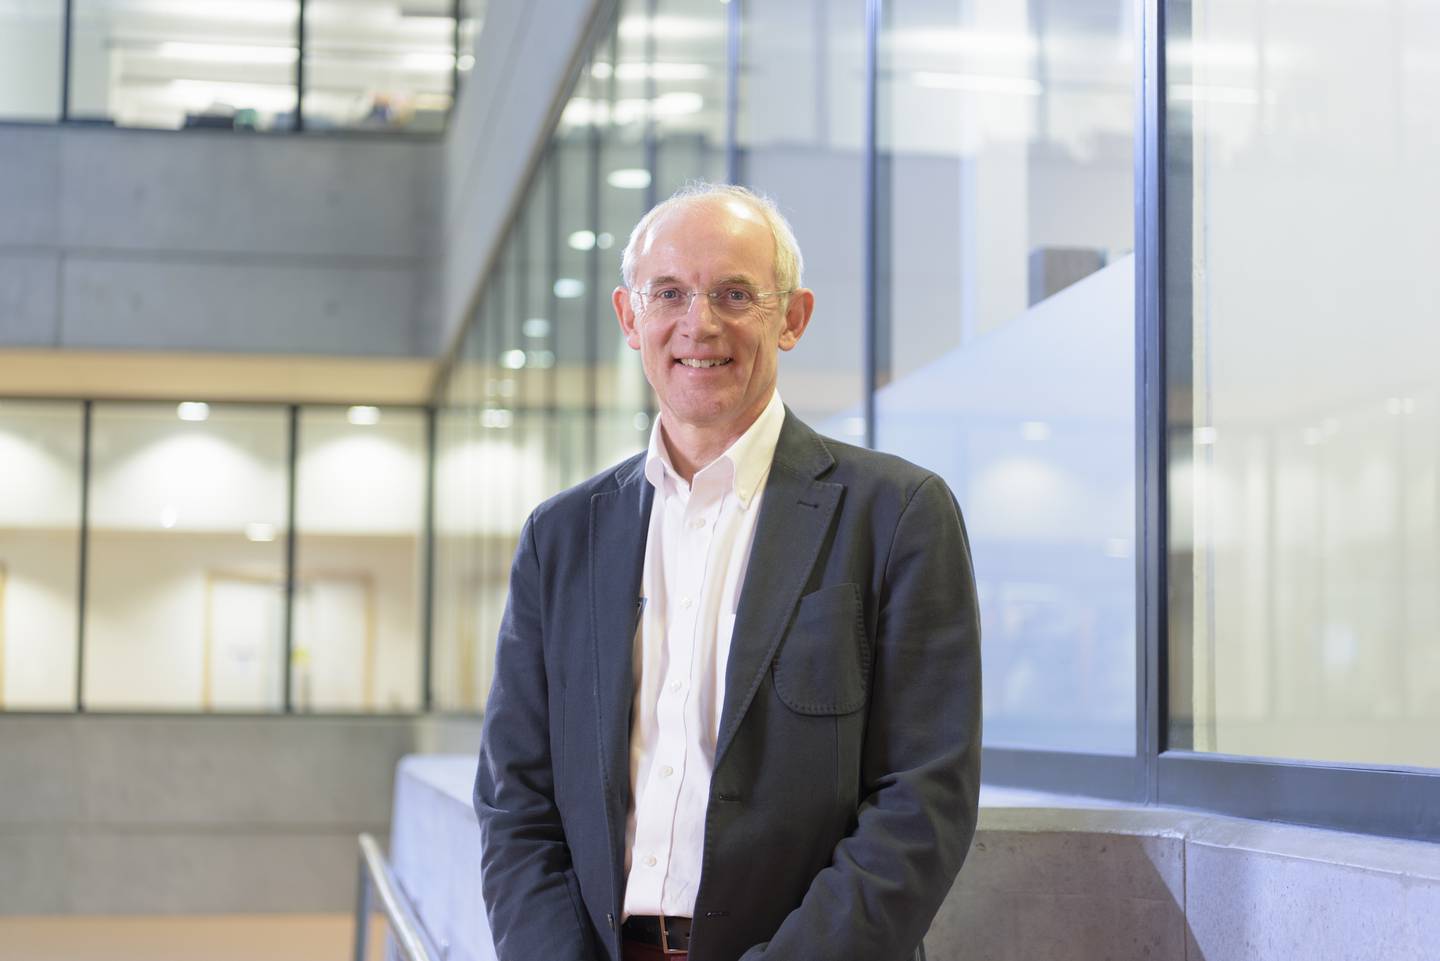 Prof Benoit van den Eynde specialises in tumour immunology at the University of Oxford and is leading the team's development of a new cancer vaccine. Photo: Monty Rakusen for Ludwig Cancer Research